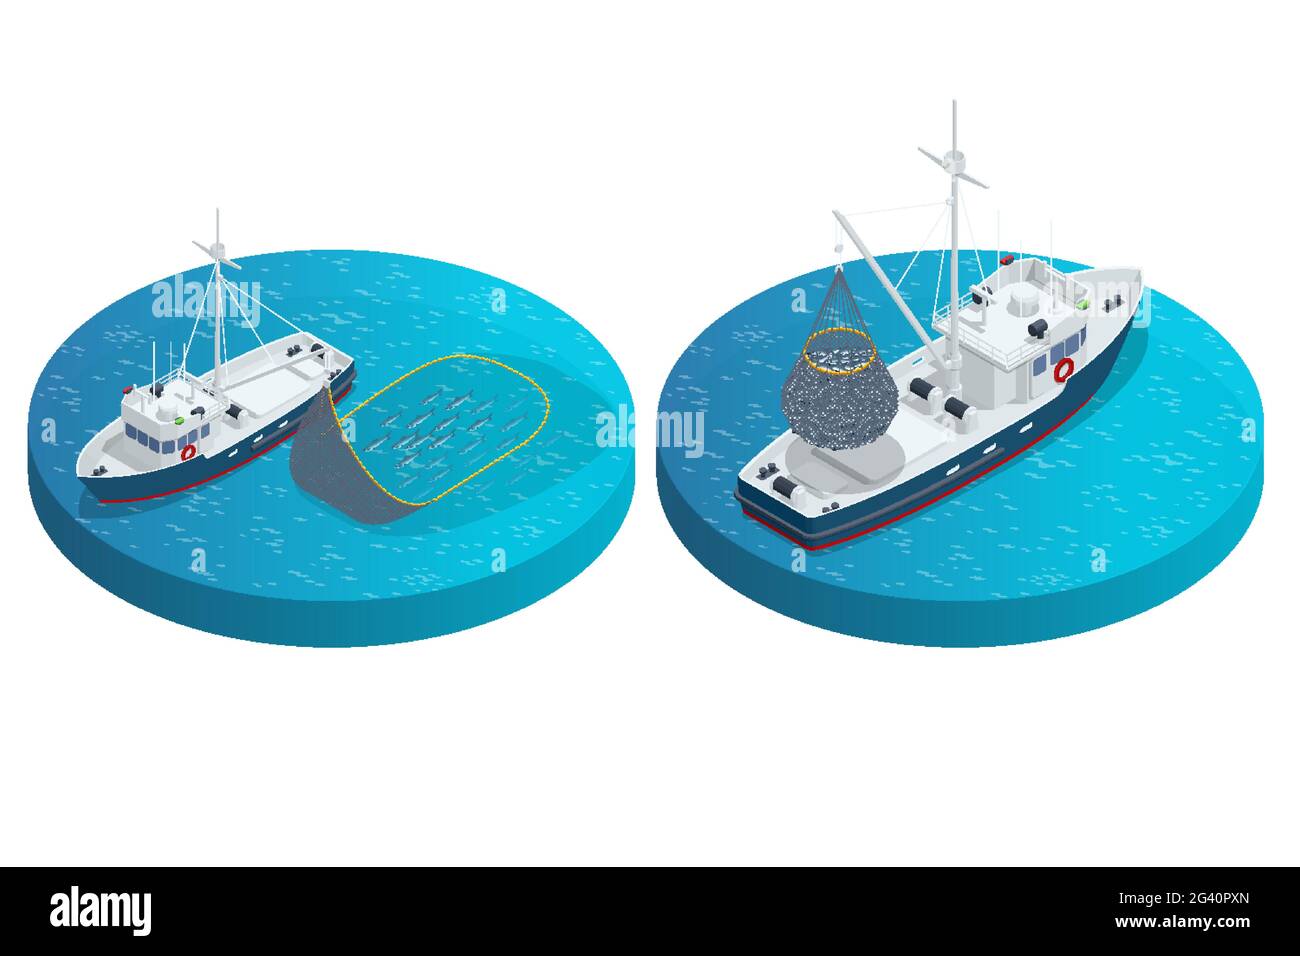 Isometric shipping seafood industry boat isolated on white background. Commercial ocean transportation Sea fishing, ship marine industry, fish boat Stock Vector